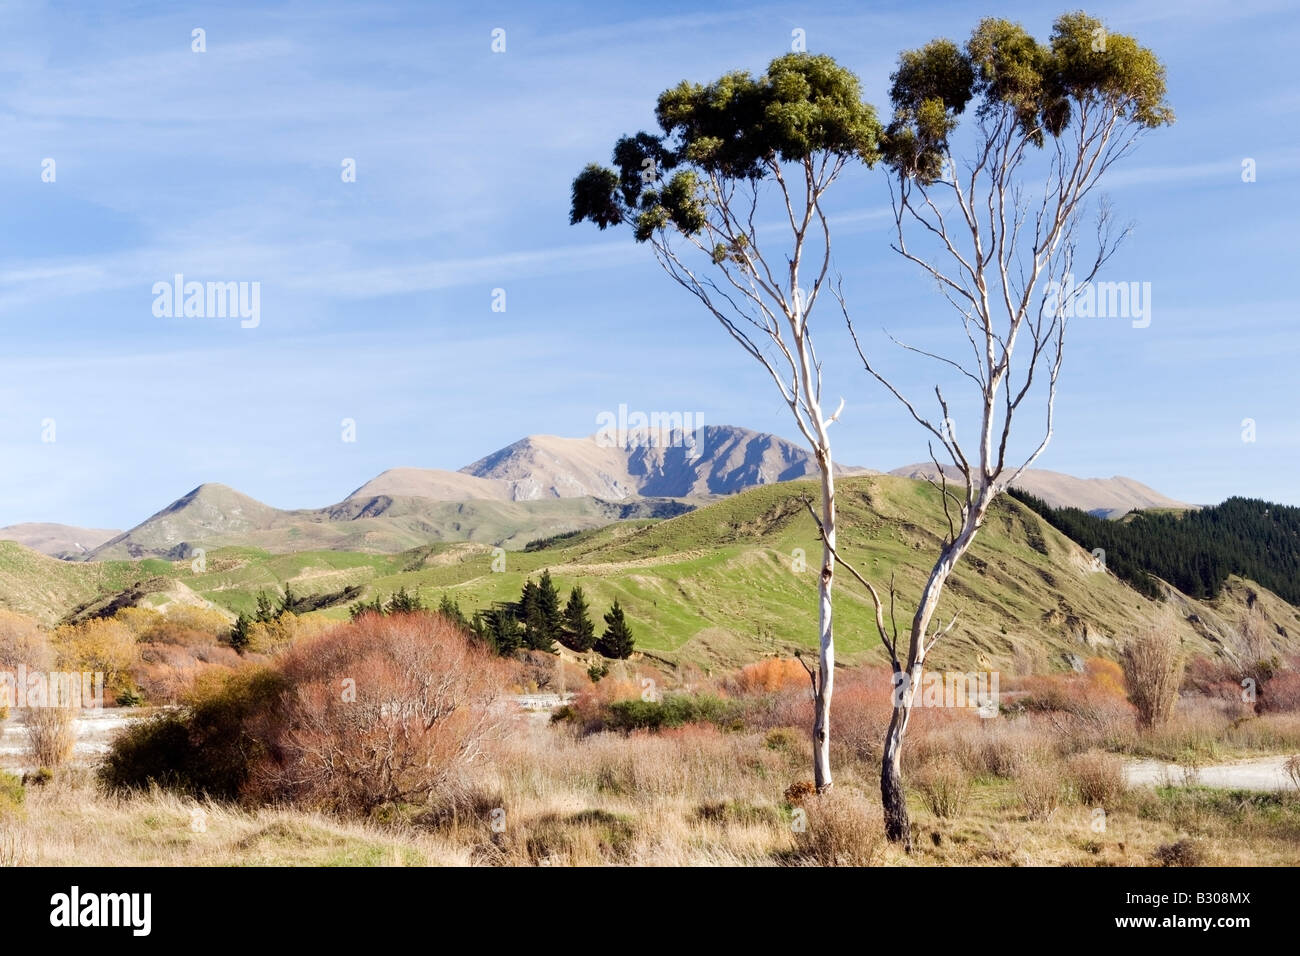 Majestic Eucalypts in Colourful New Zealand landscape Stock Photo